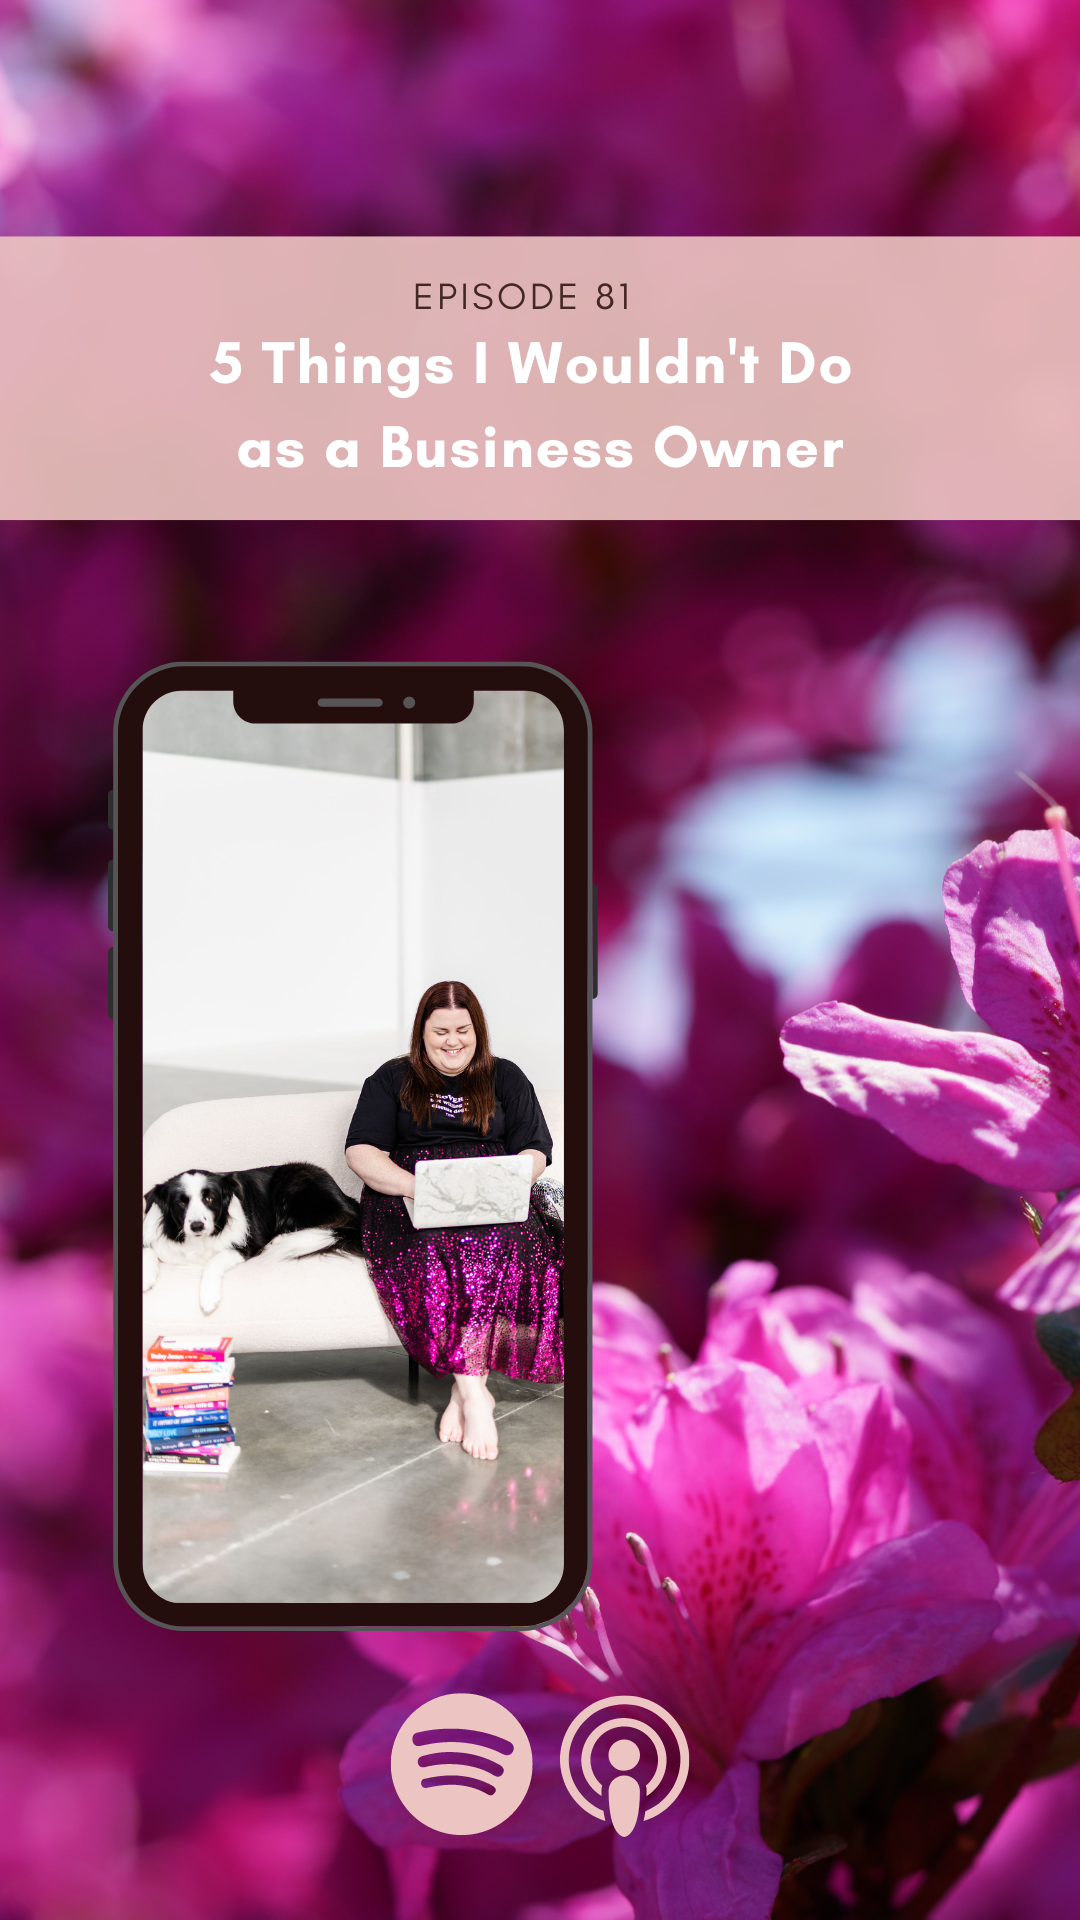 5 things I wouldn’t do as a business owner